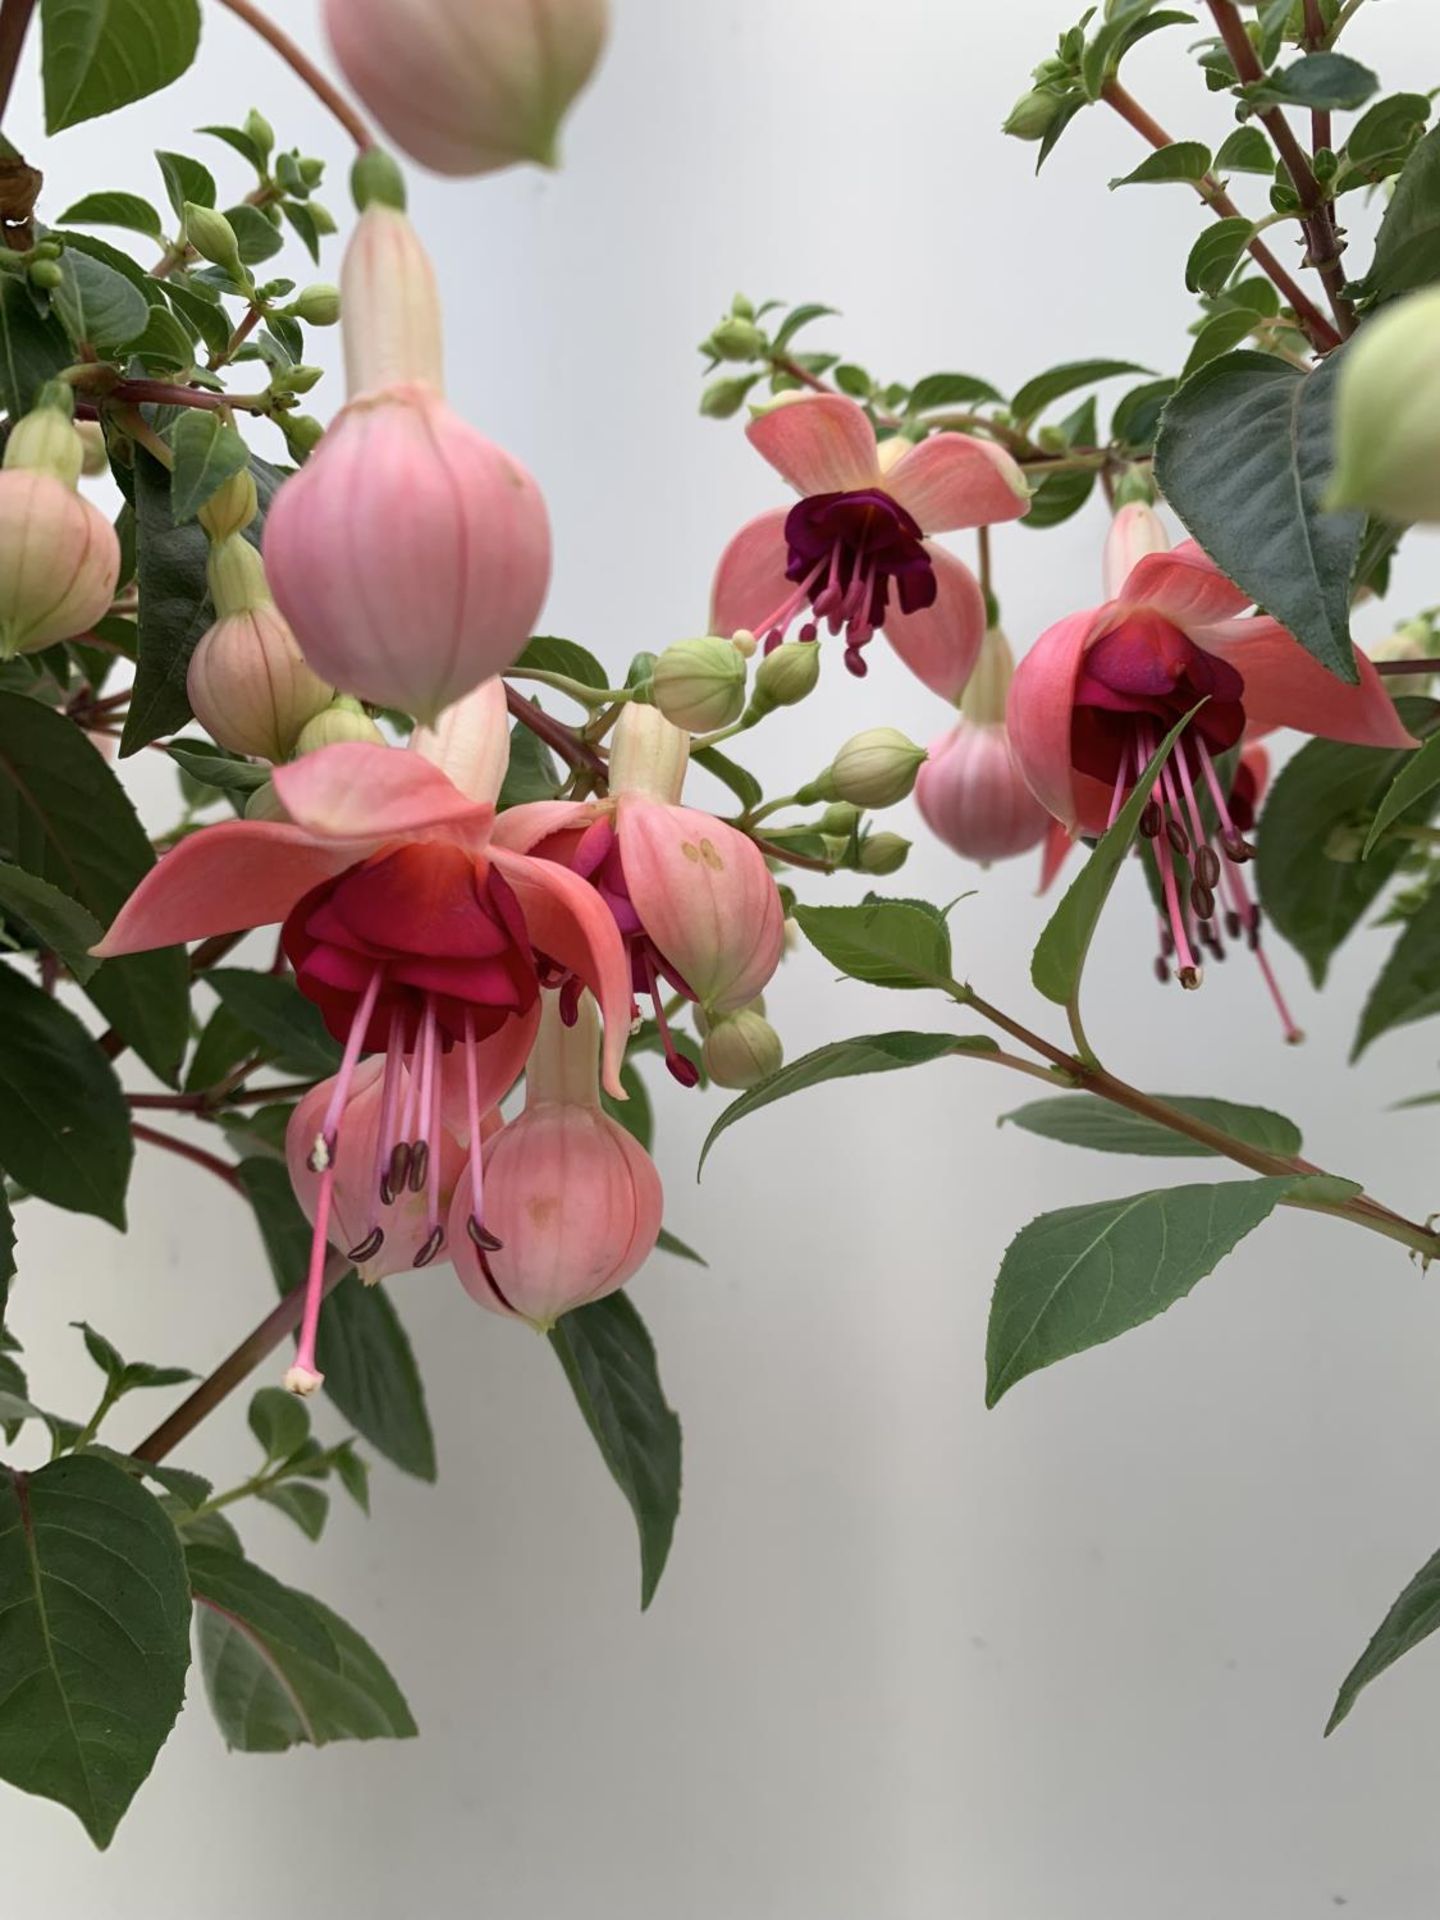 TWO BELLA STANDARD PINK FUCHSIA IN A 3 LTR POTS 70CM -80CM TALL TO BE SOLD FOR THE TWO PLUS VAT - Image 4 of 5